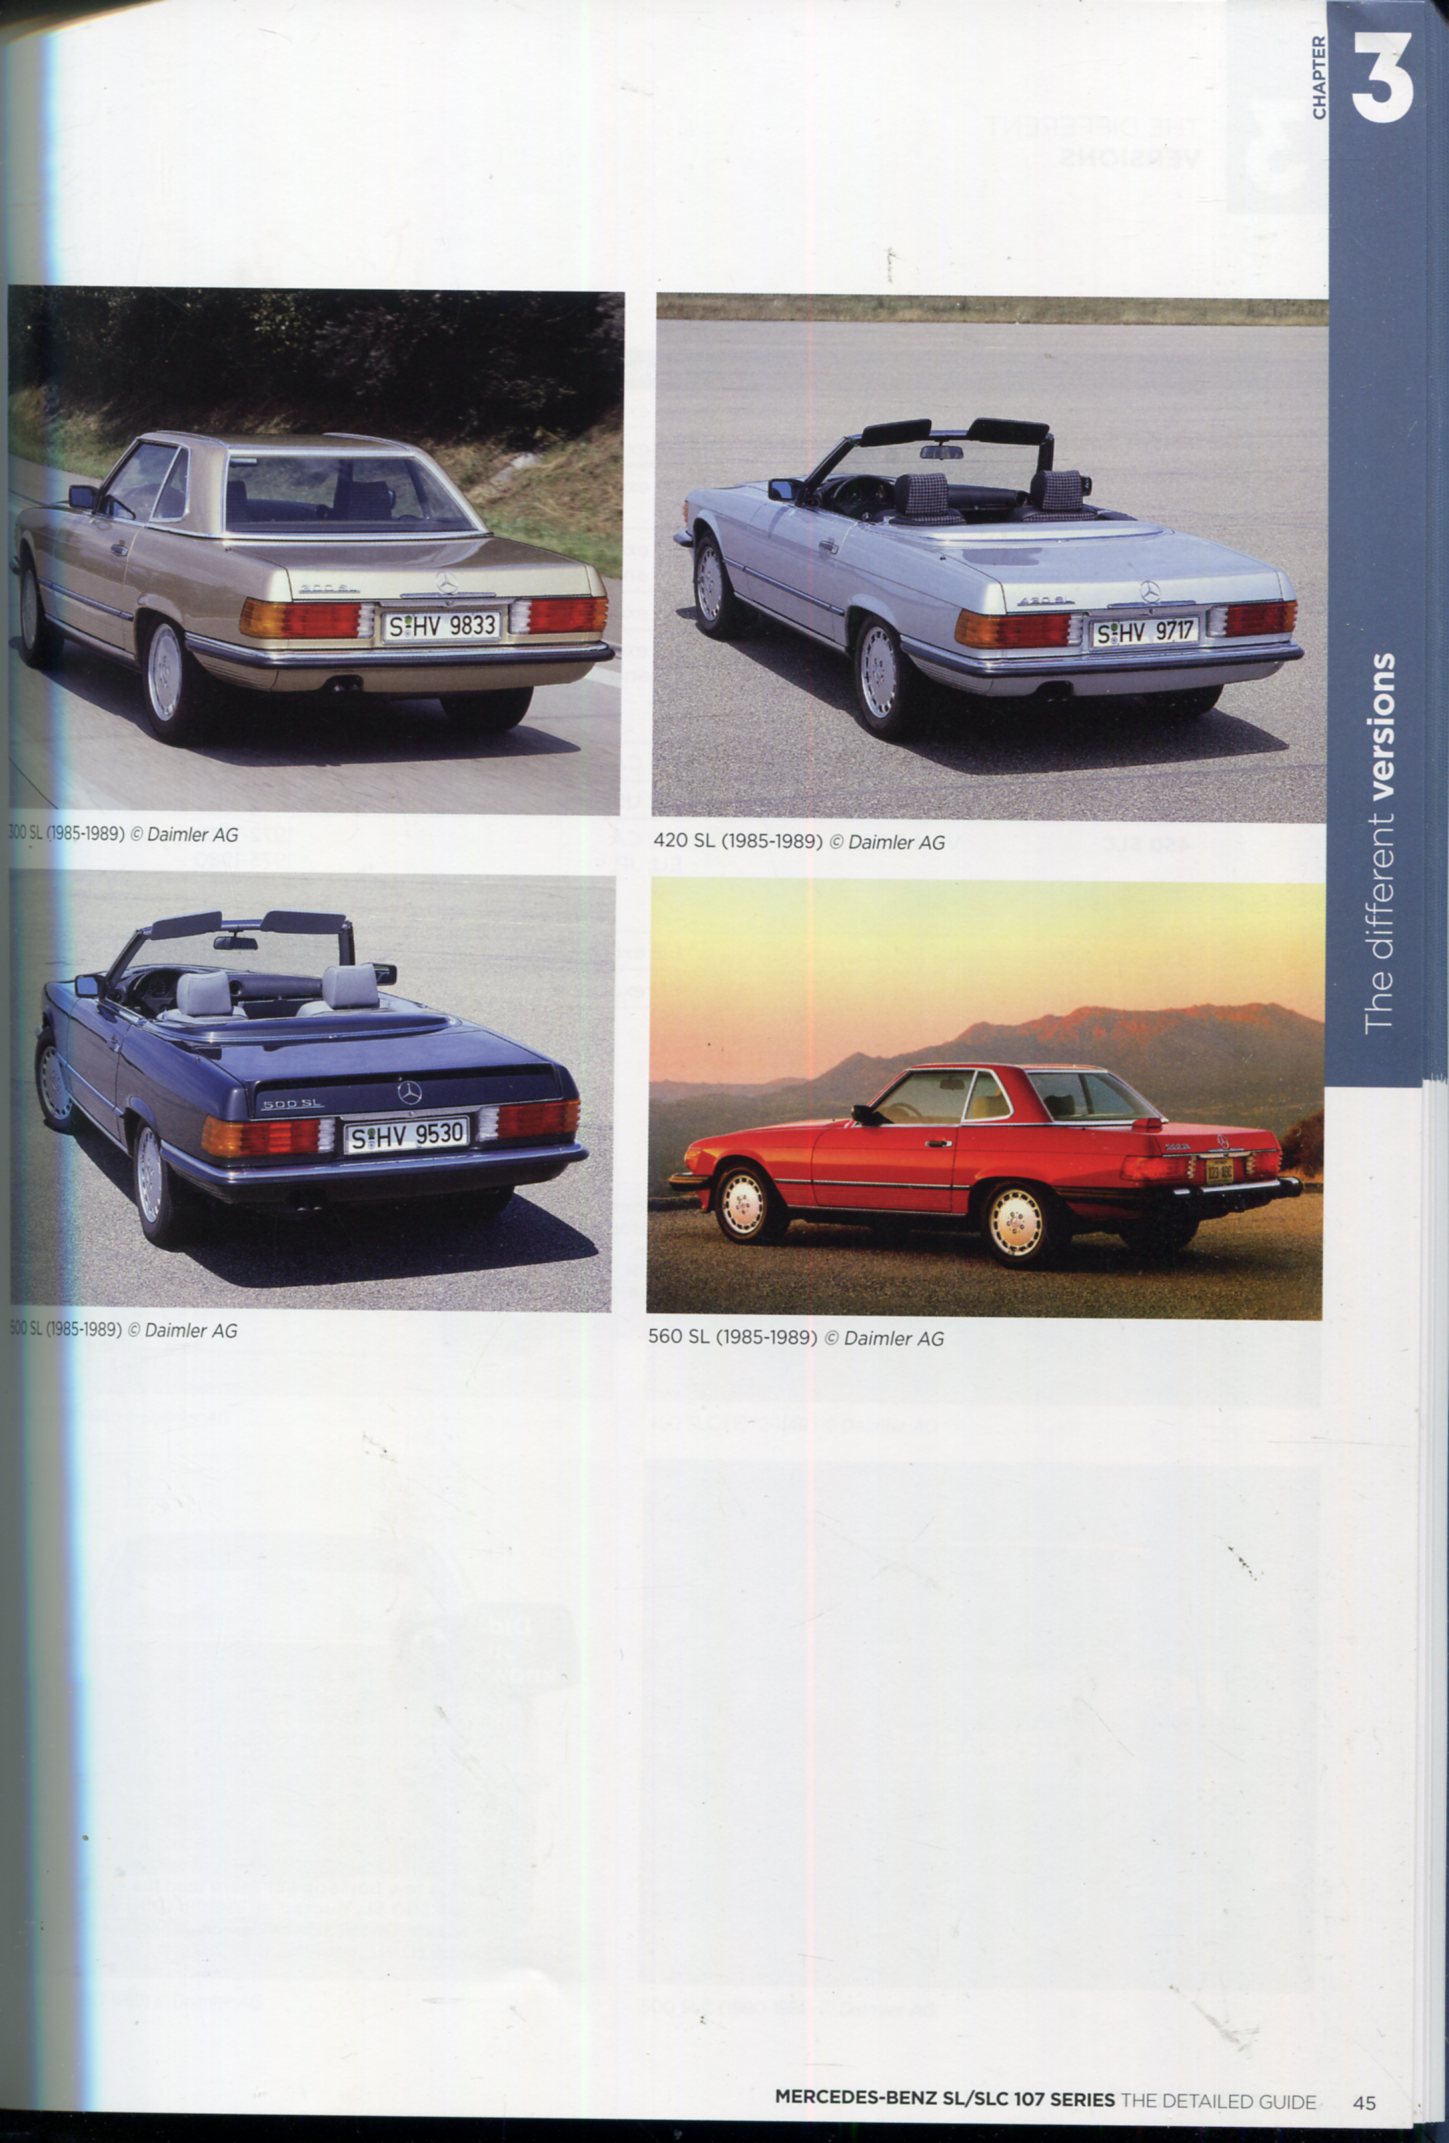 Book Review: Mercedes-Benz SL/SLC 107 Series Guide - MercedesHeritage